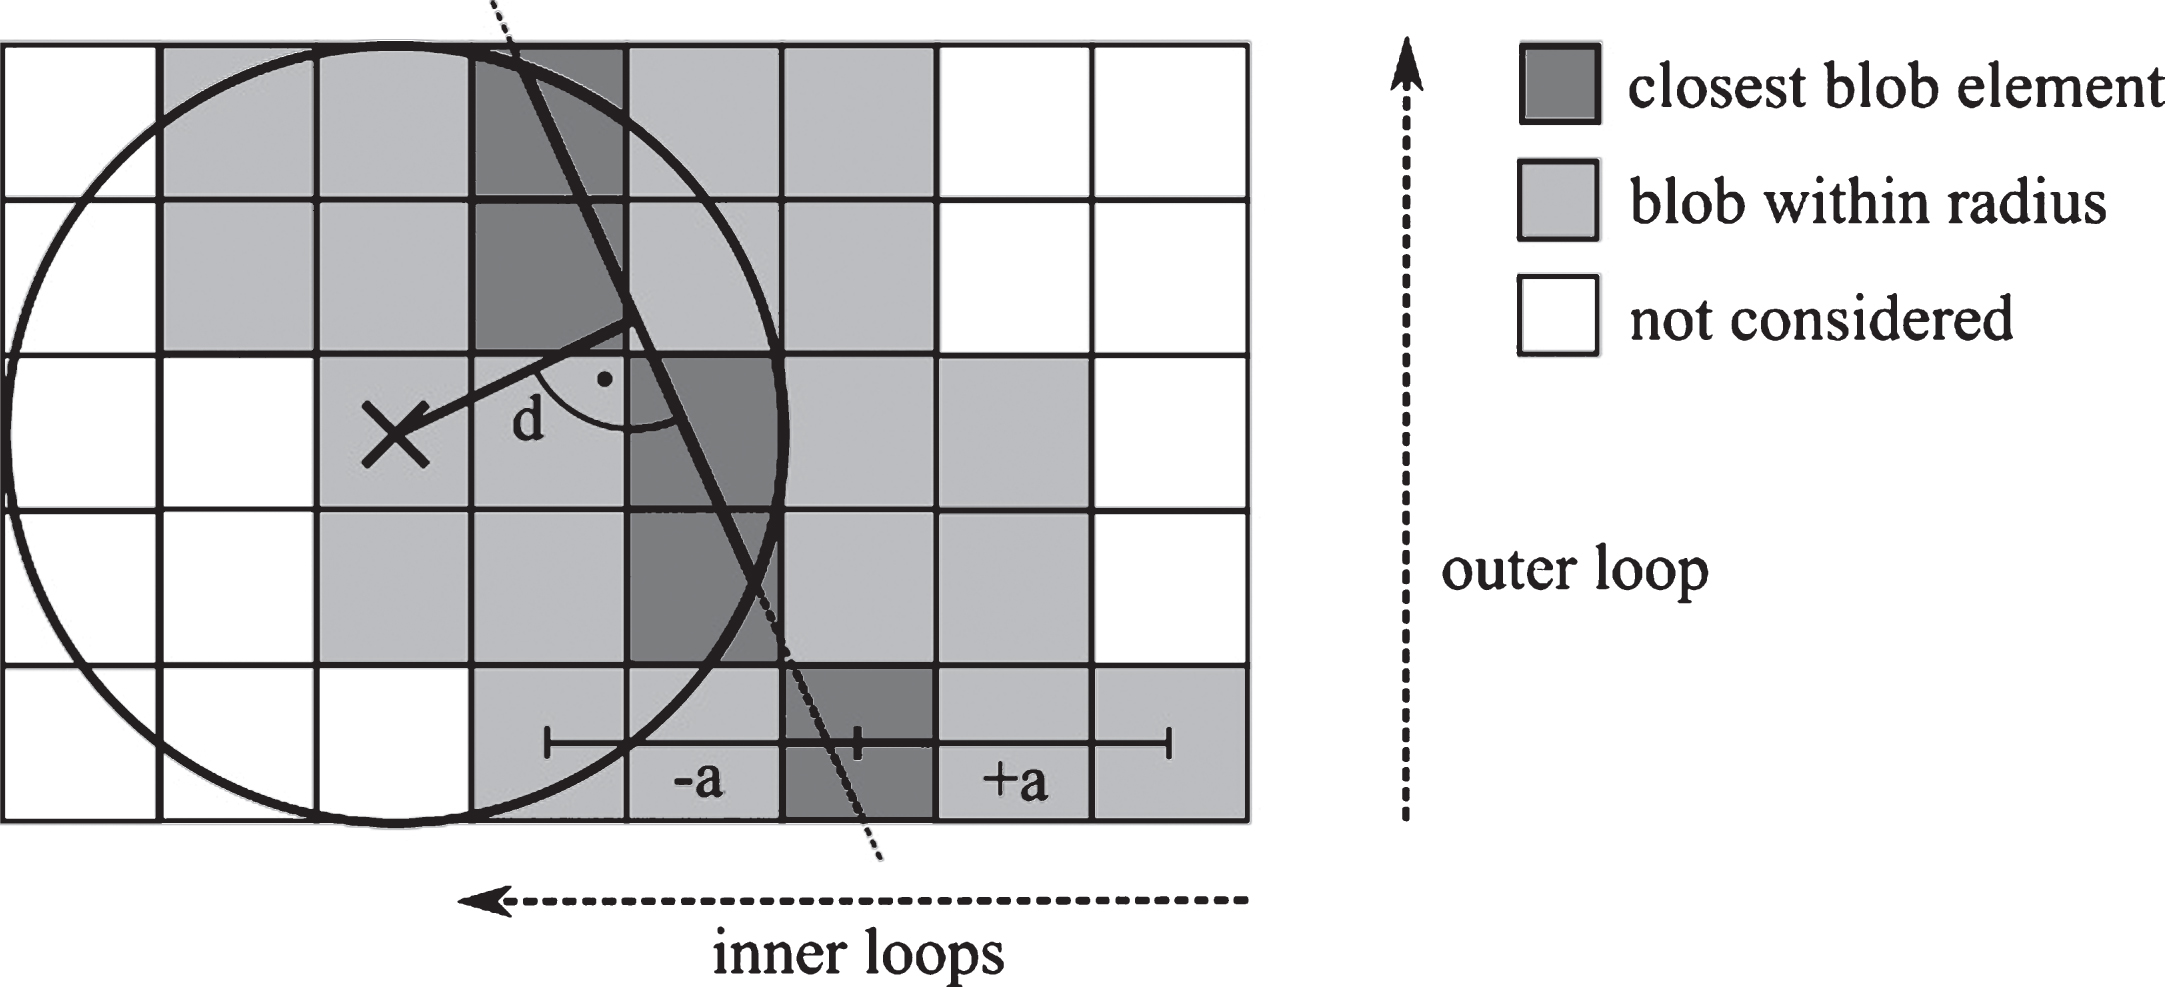 Forward projection algorithm including slice stepping using blobs. For each pixel in the projection image the line integral of a line through this pixel is computed using nested loops. The outer loop iterates slices in the primary line direction. For each slice, the blob closest to the line is determined and all blobs within radius a are iterated. For each blob, the line integral is determined by means of a lookup dependent on the distance d between blob center and line.